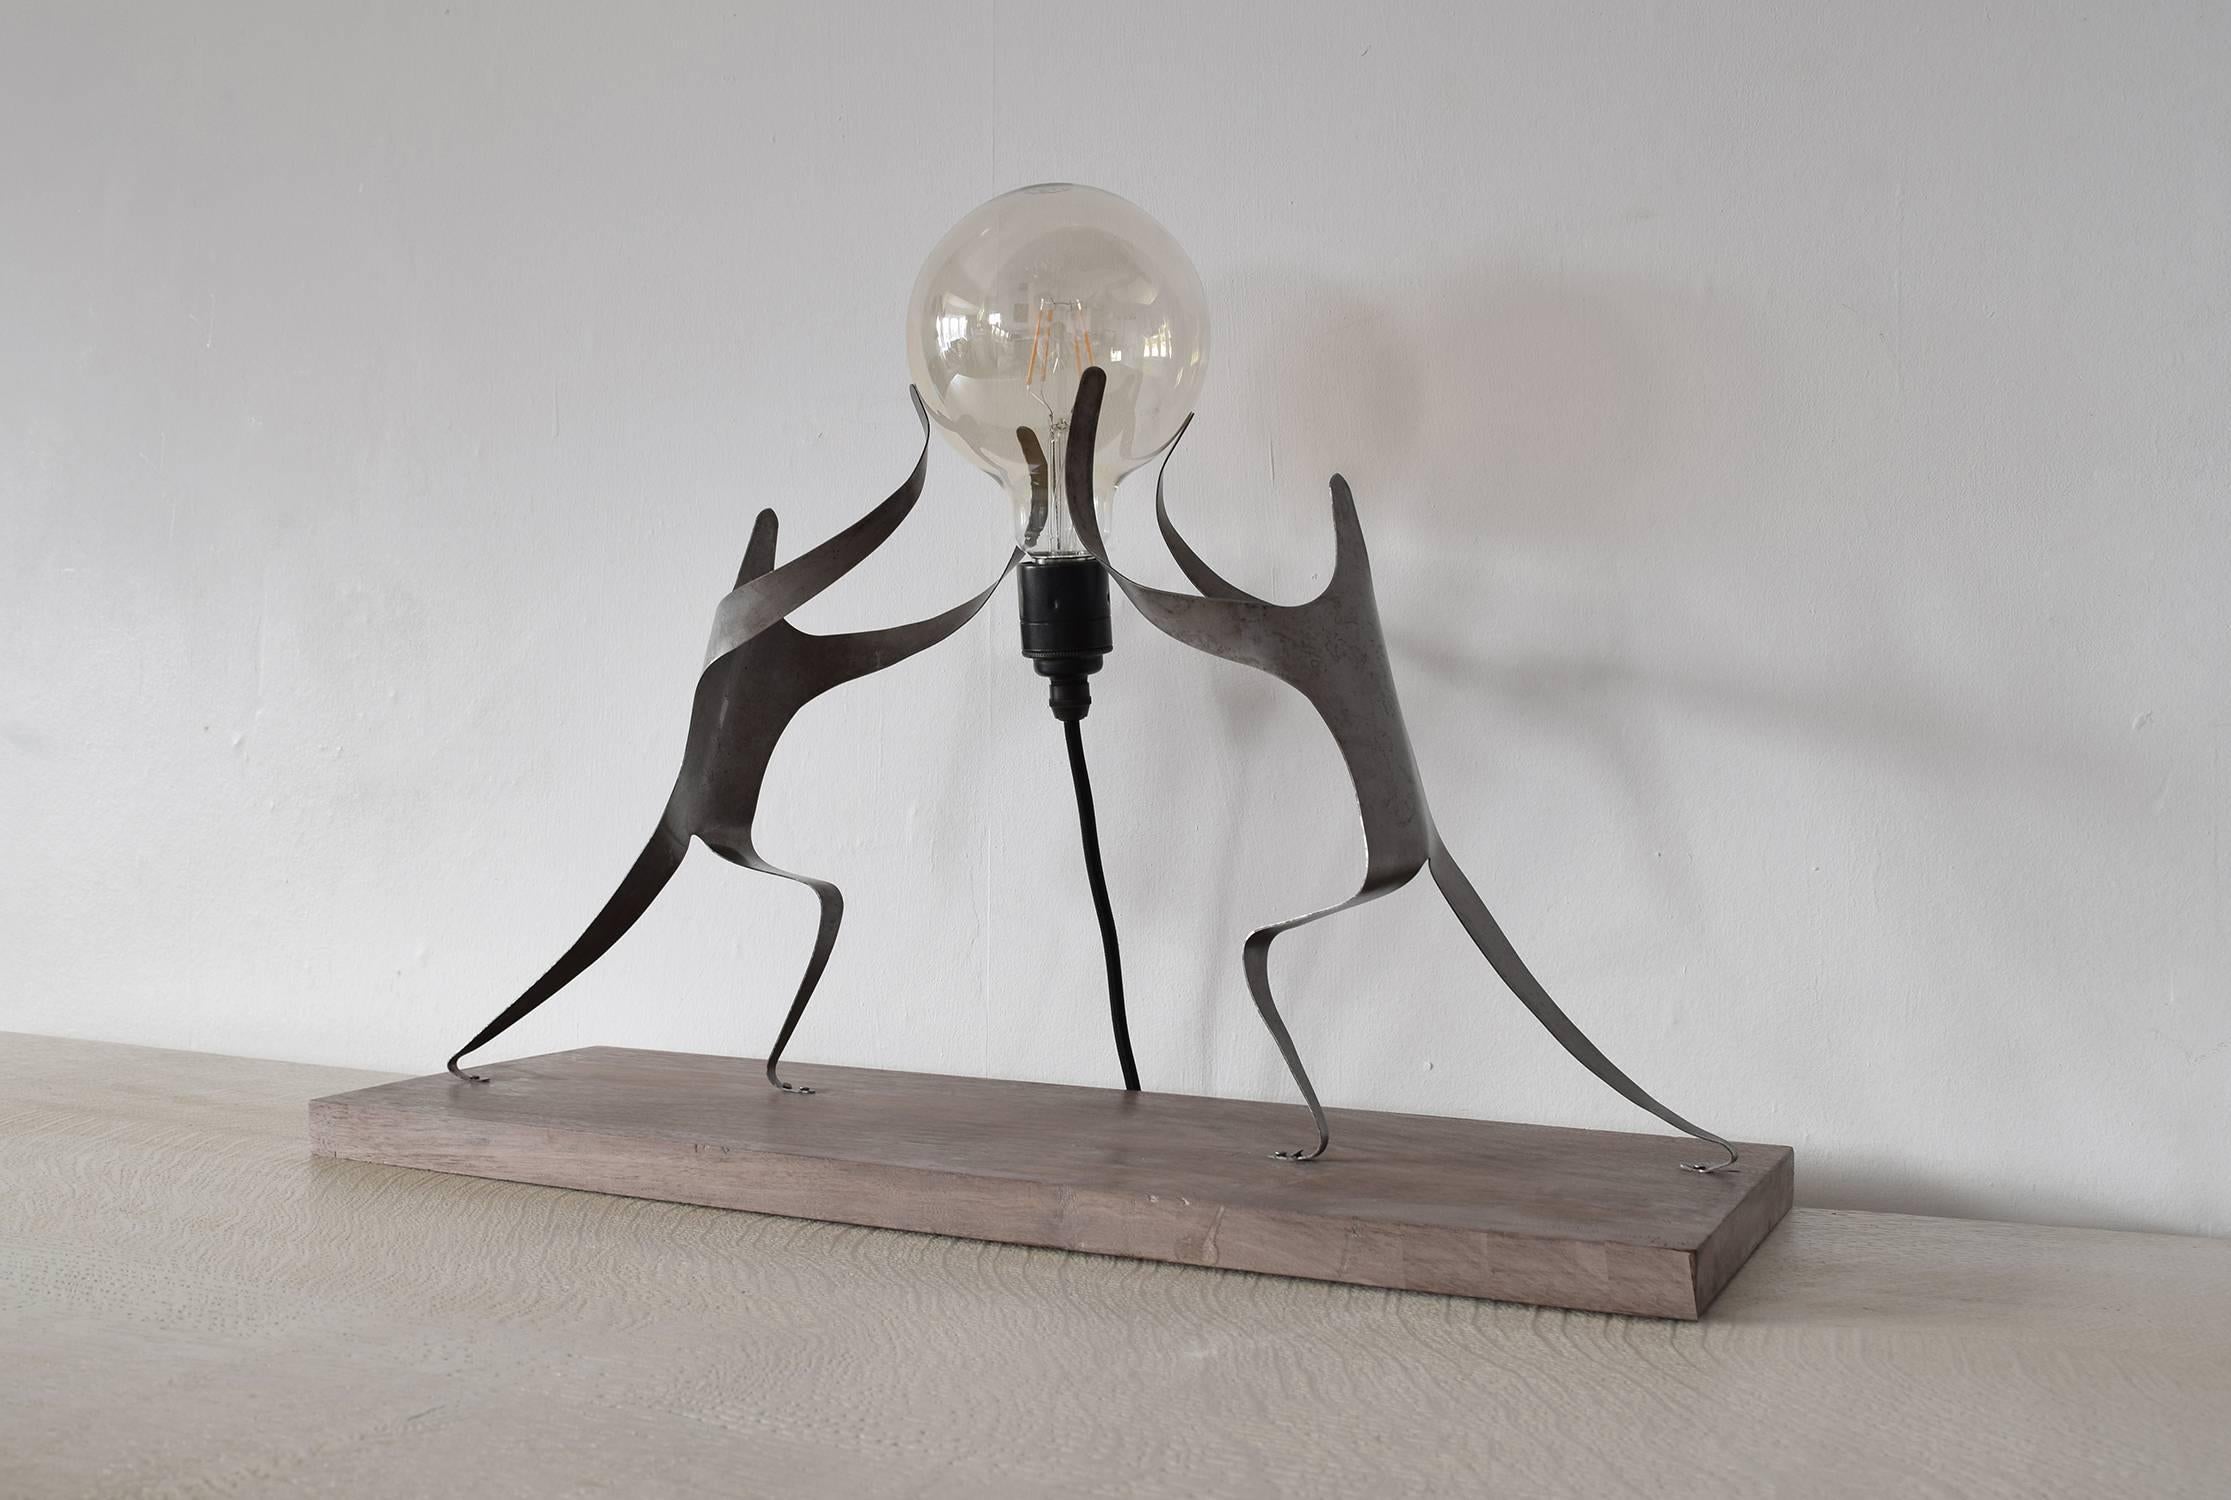 
A table lamp designed and handcrafted by Dominic Swire.

It can also function as a stand-alone sculpture.

Two bent steel figures stand on an American walnut base.

The piece has been exhibited at New Designers, Business Design Centre, Islington,